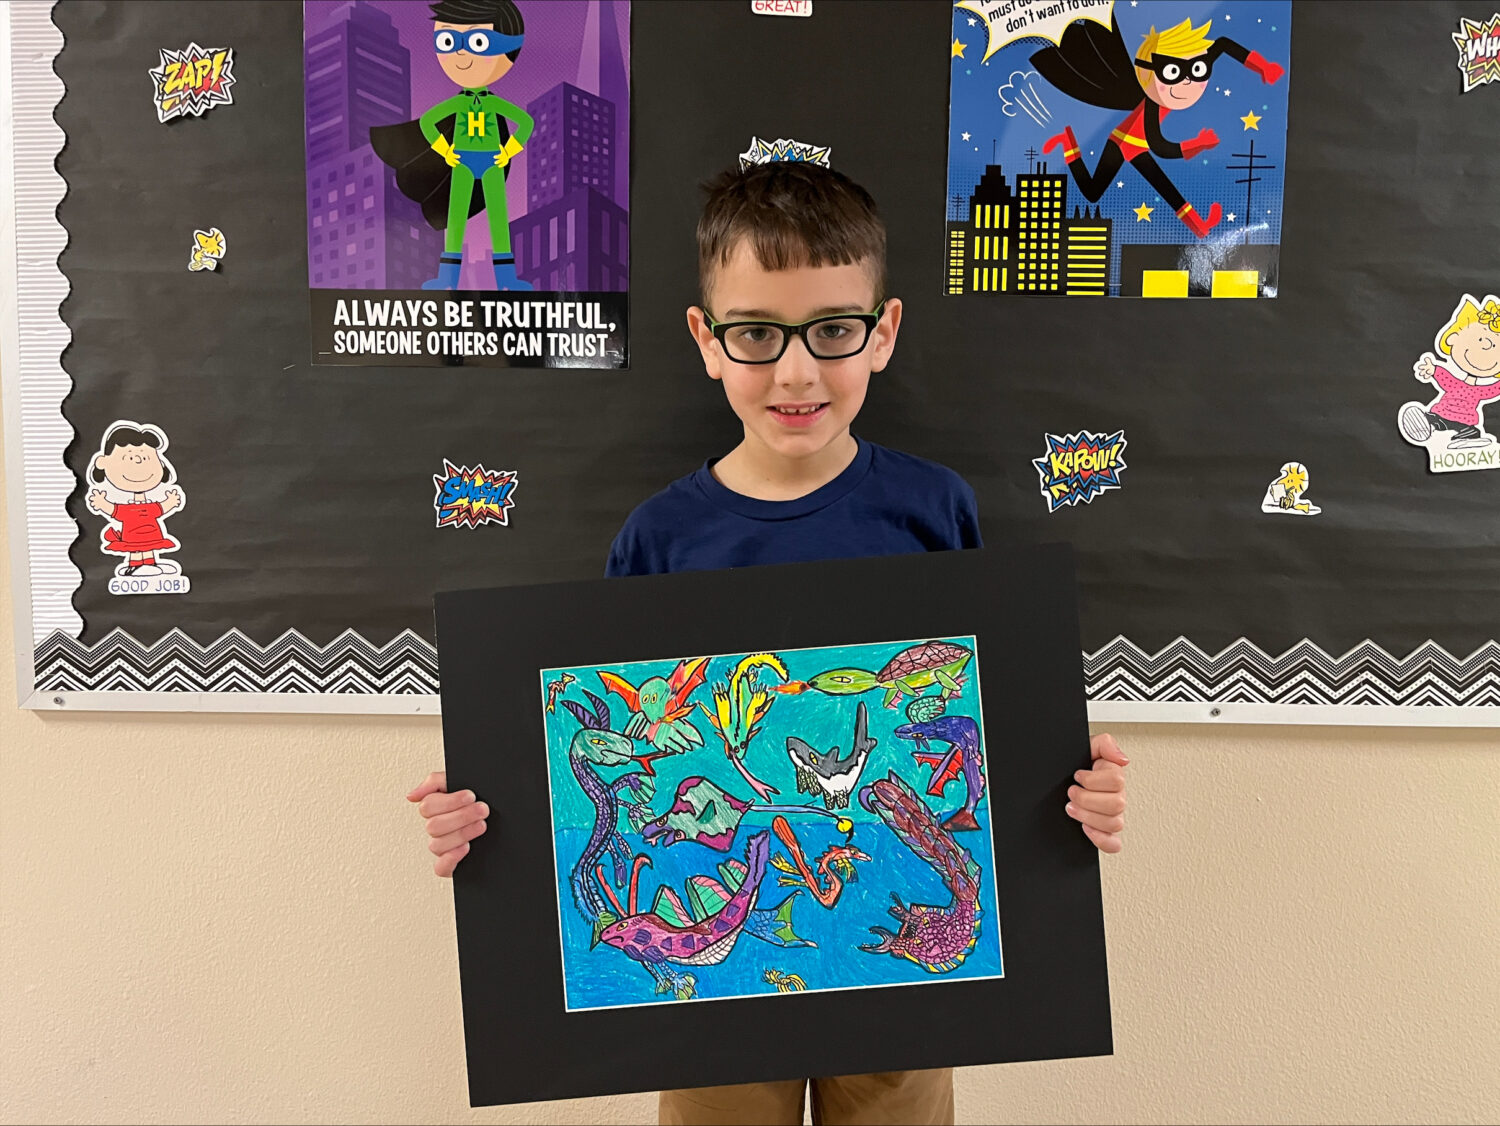 Boy with glasses holds up his artwork.